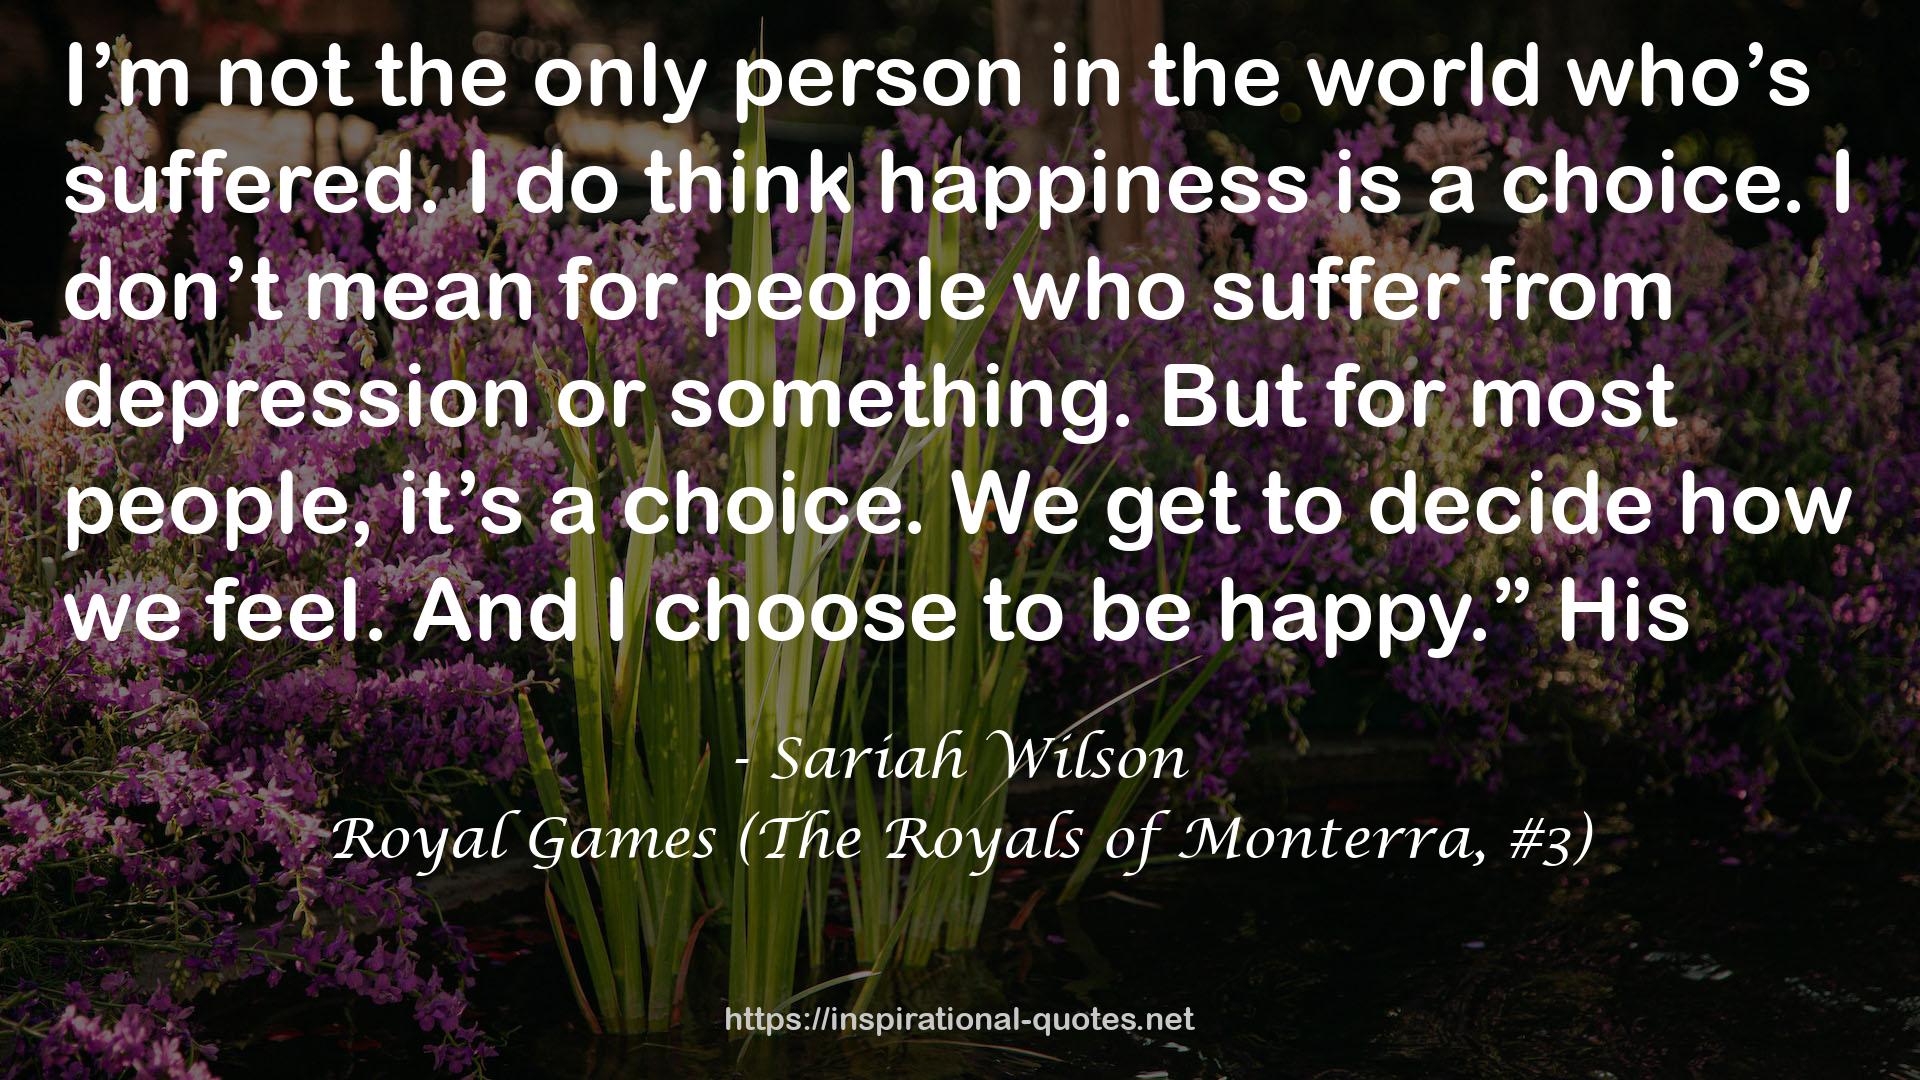 Royal Games (The Royals of Monterra, #3) QUOTES